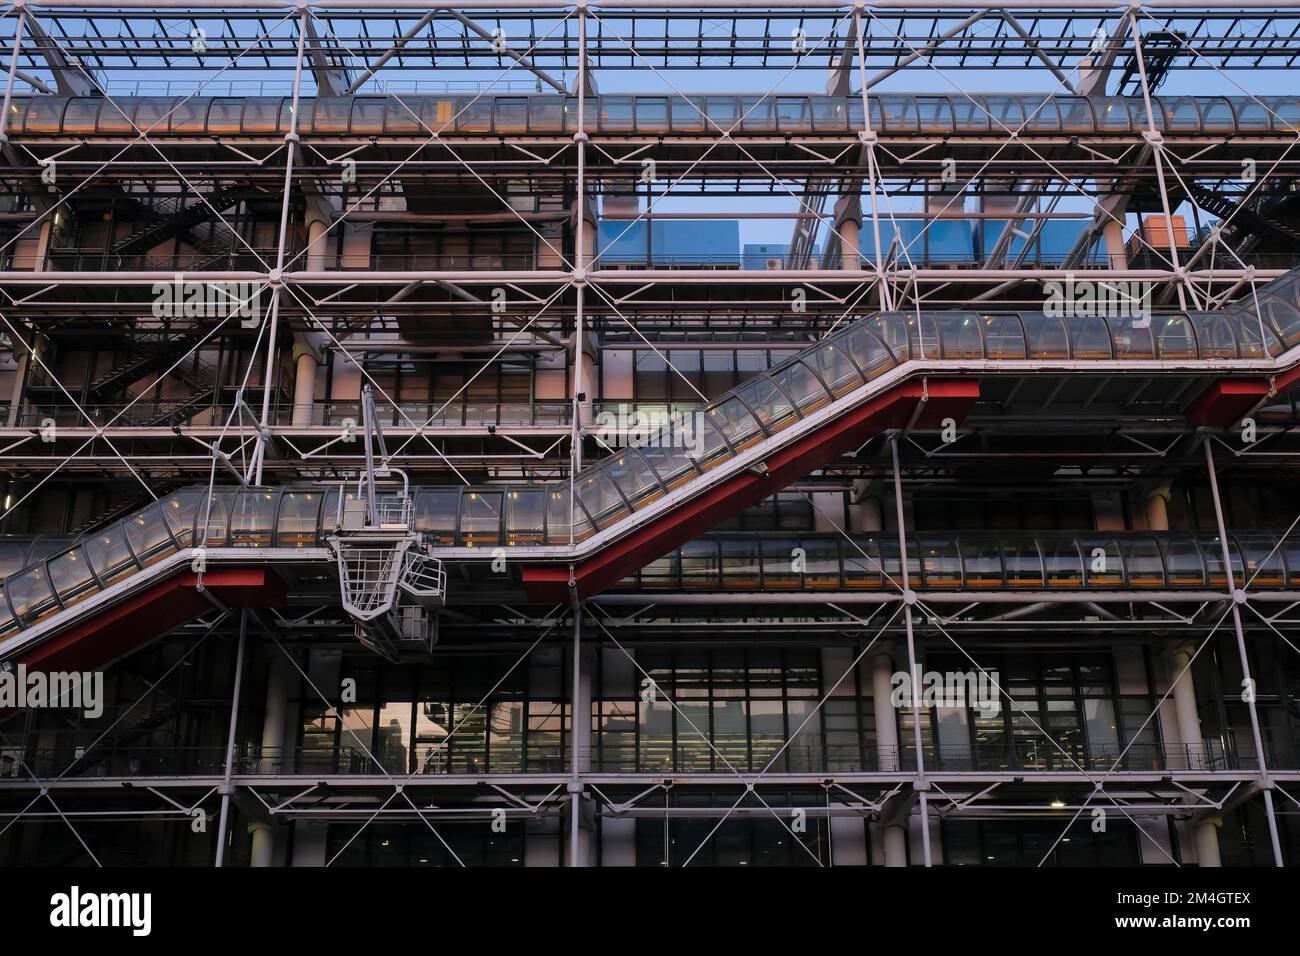 Paris, France - glass and steel exterior of Centre Pompidou. High-tech architecture of National Museum of Modern Art. Horizontal background. No person Stock Photo